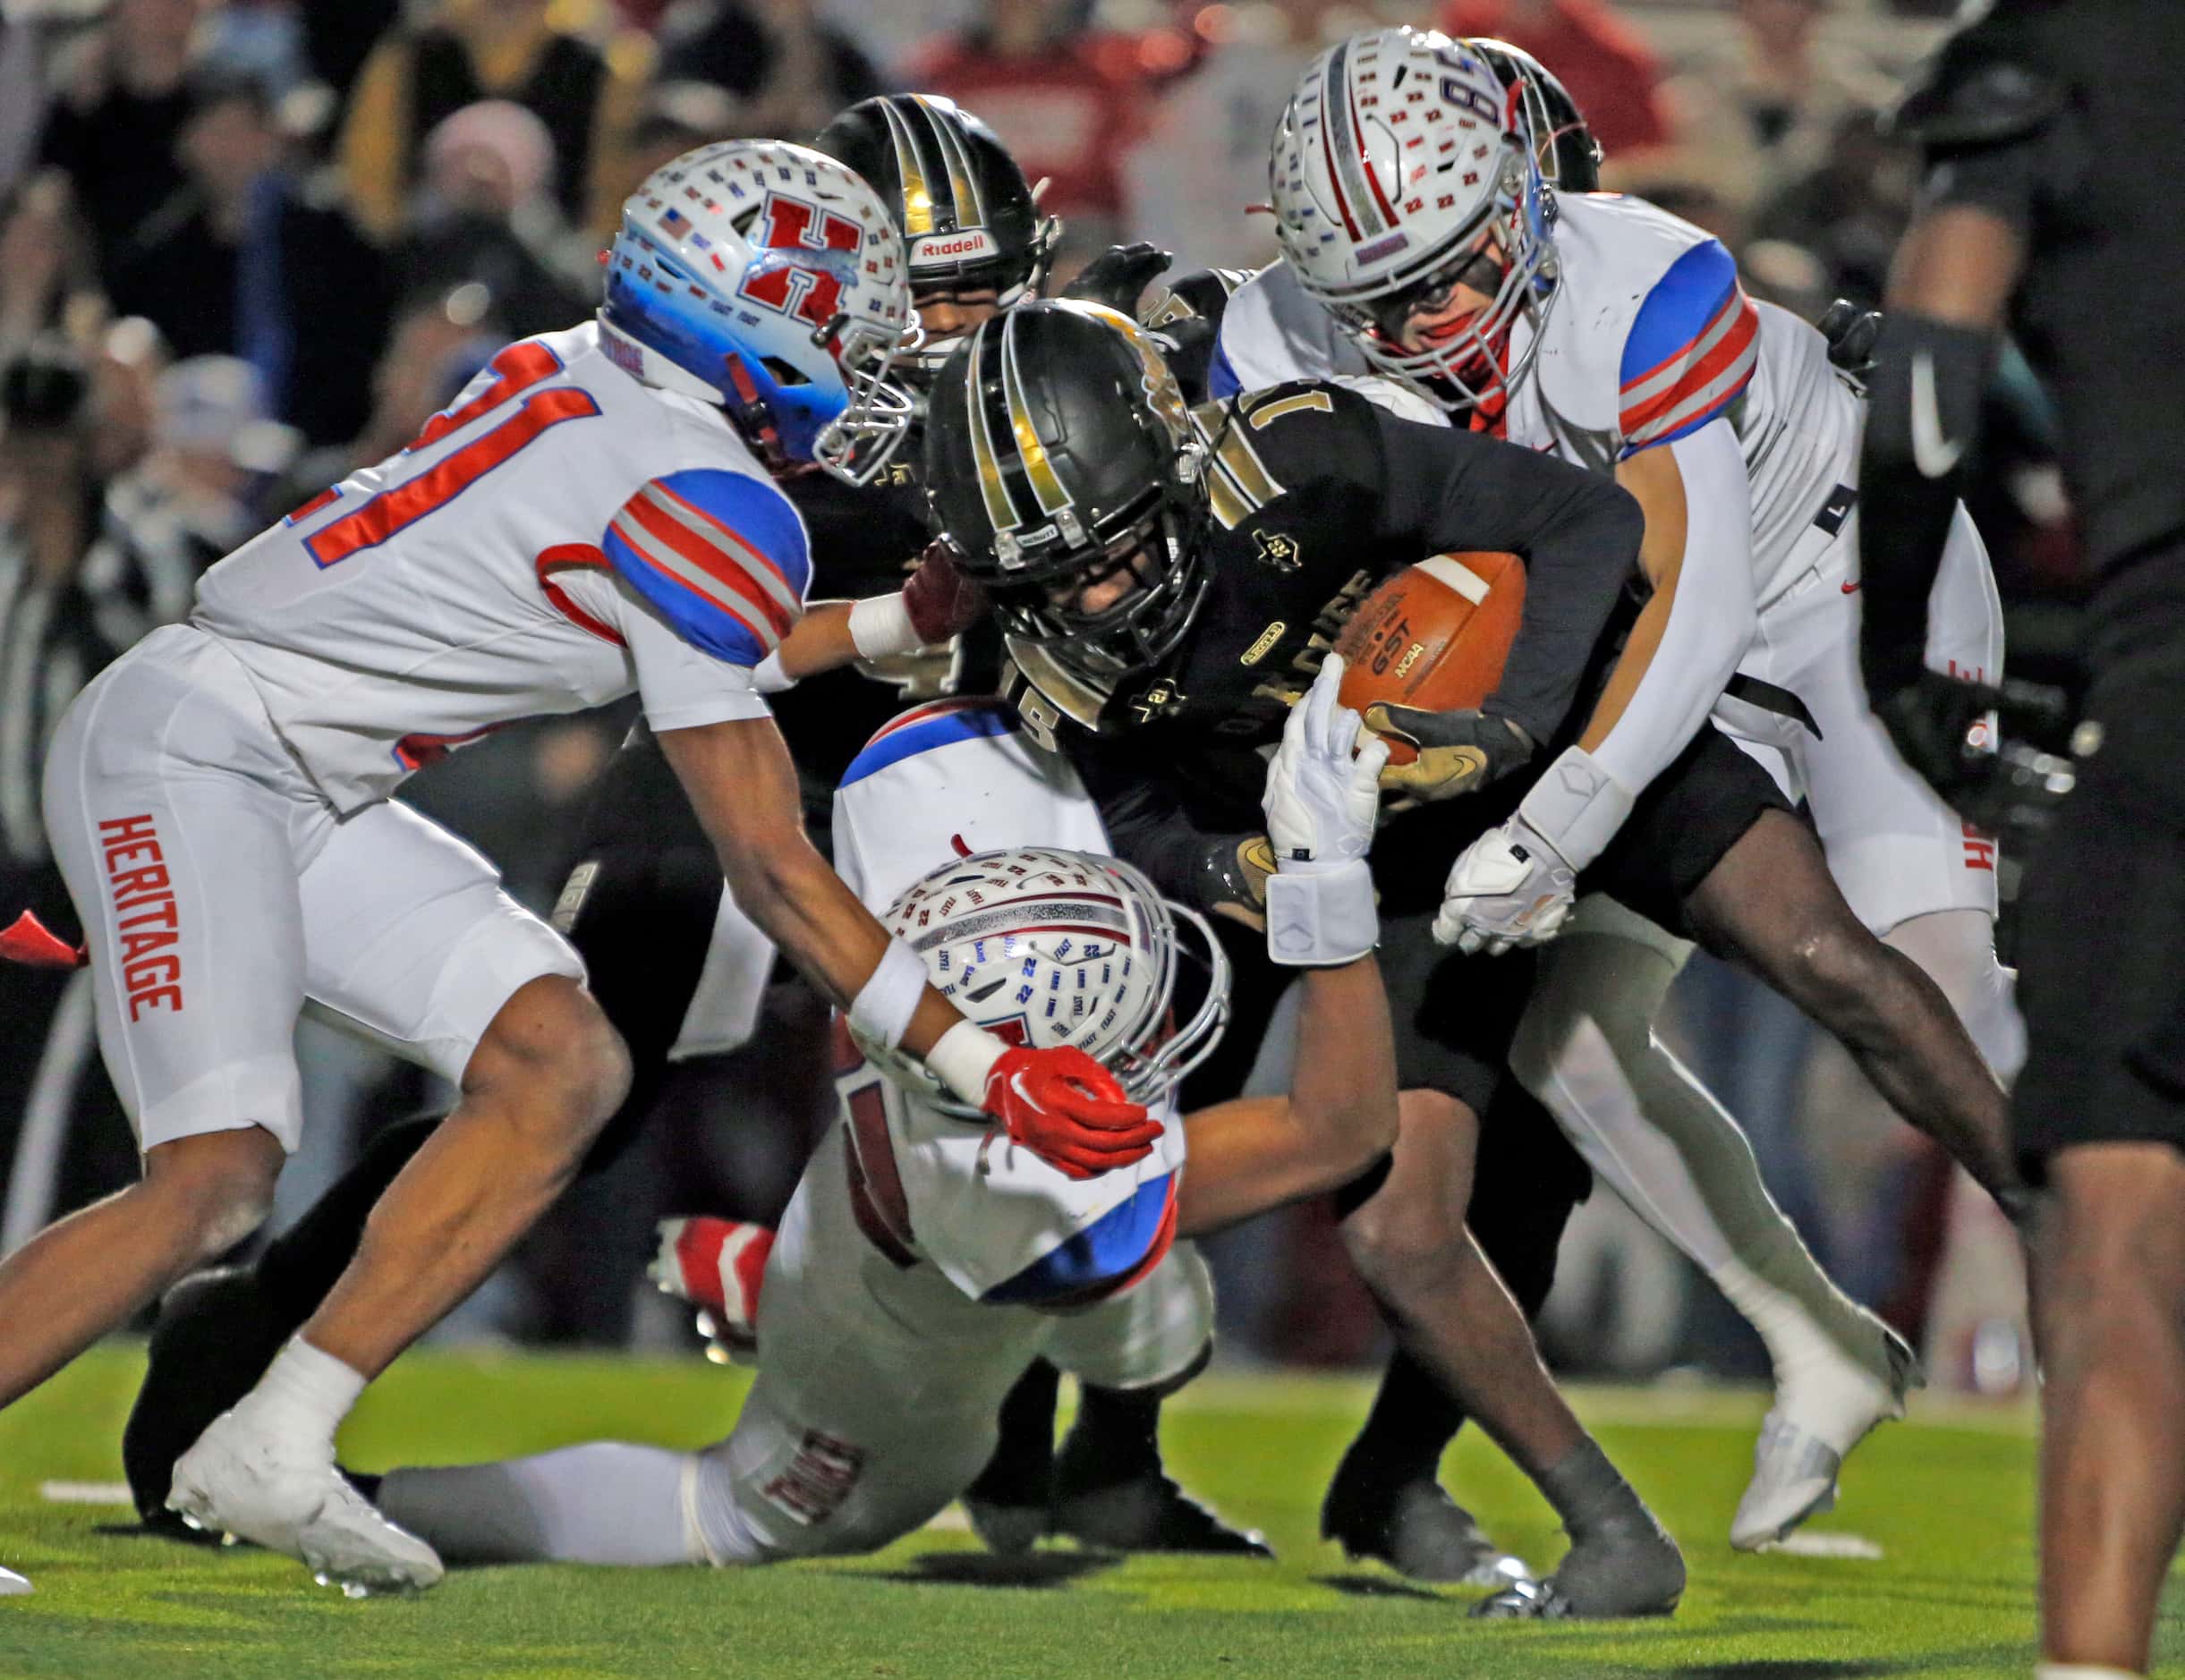 A group of Midlothian Heritage high defenders stop South Oak Cliff WR Daveon Ennis (15)...